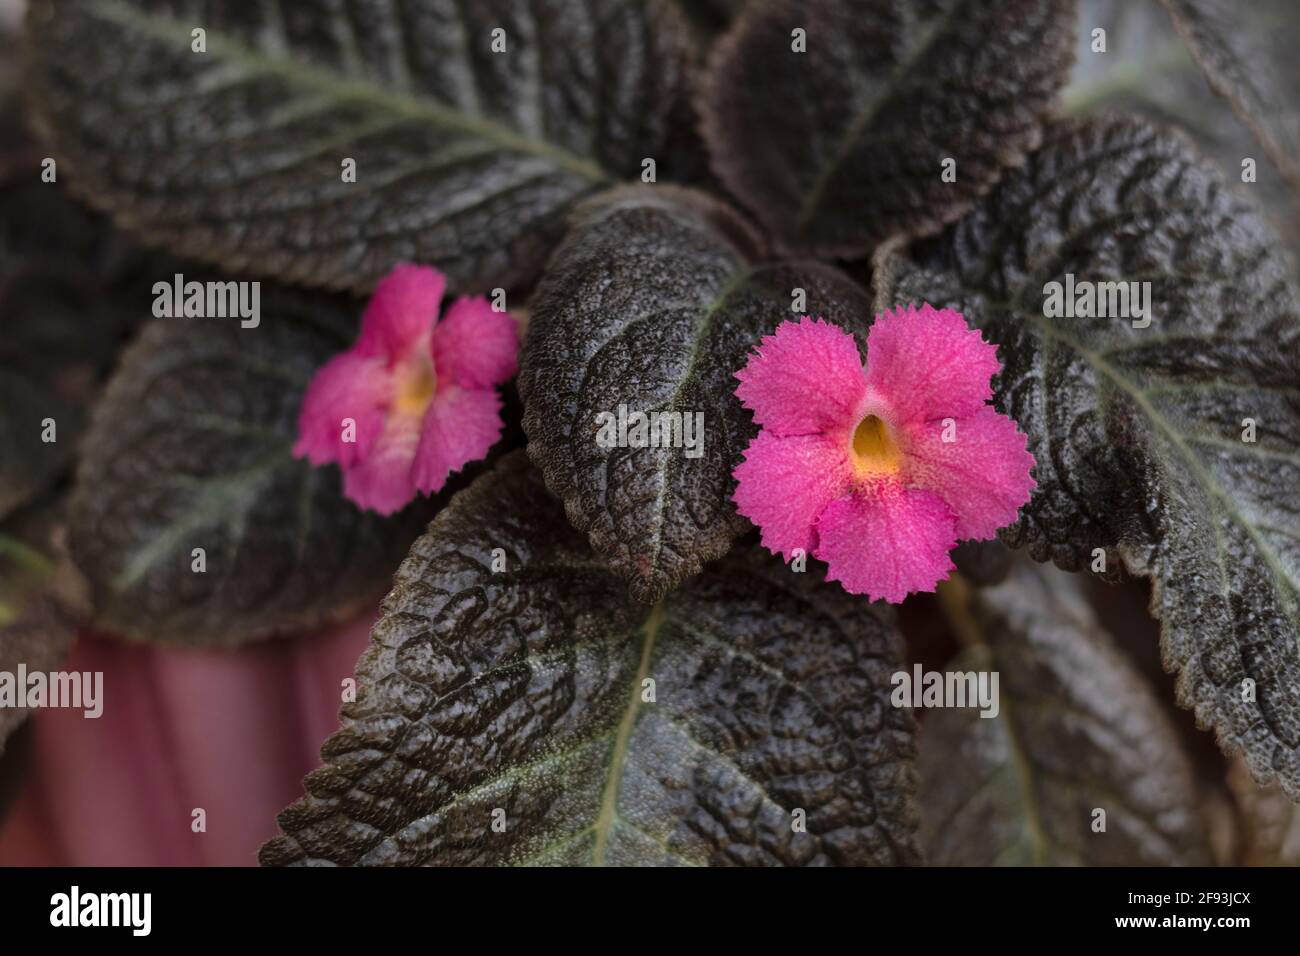 Flame violet plant and pink flowers, Episcia cupreata, India Stock Photo